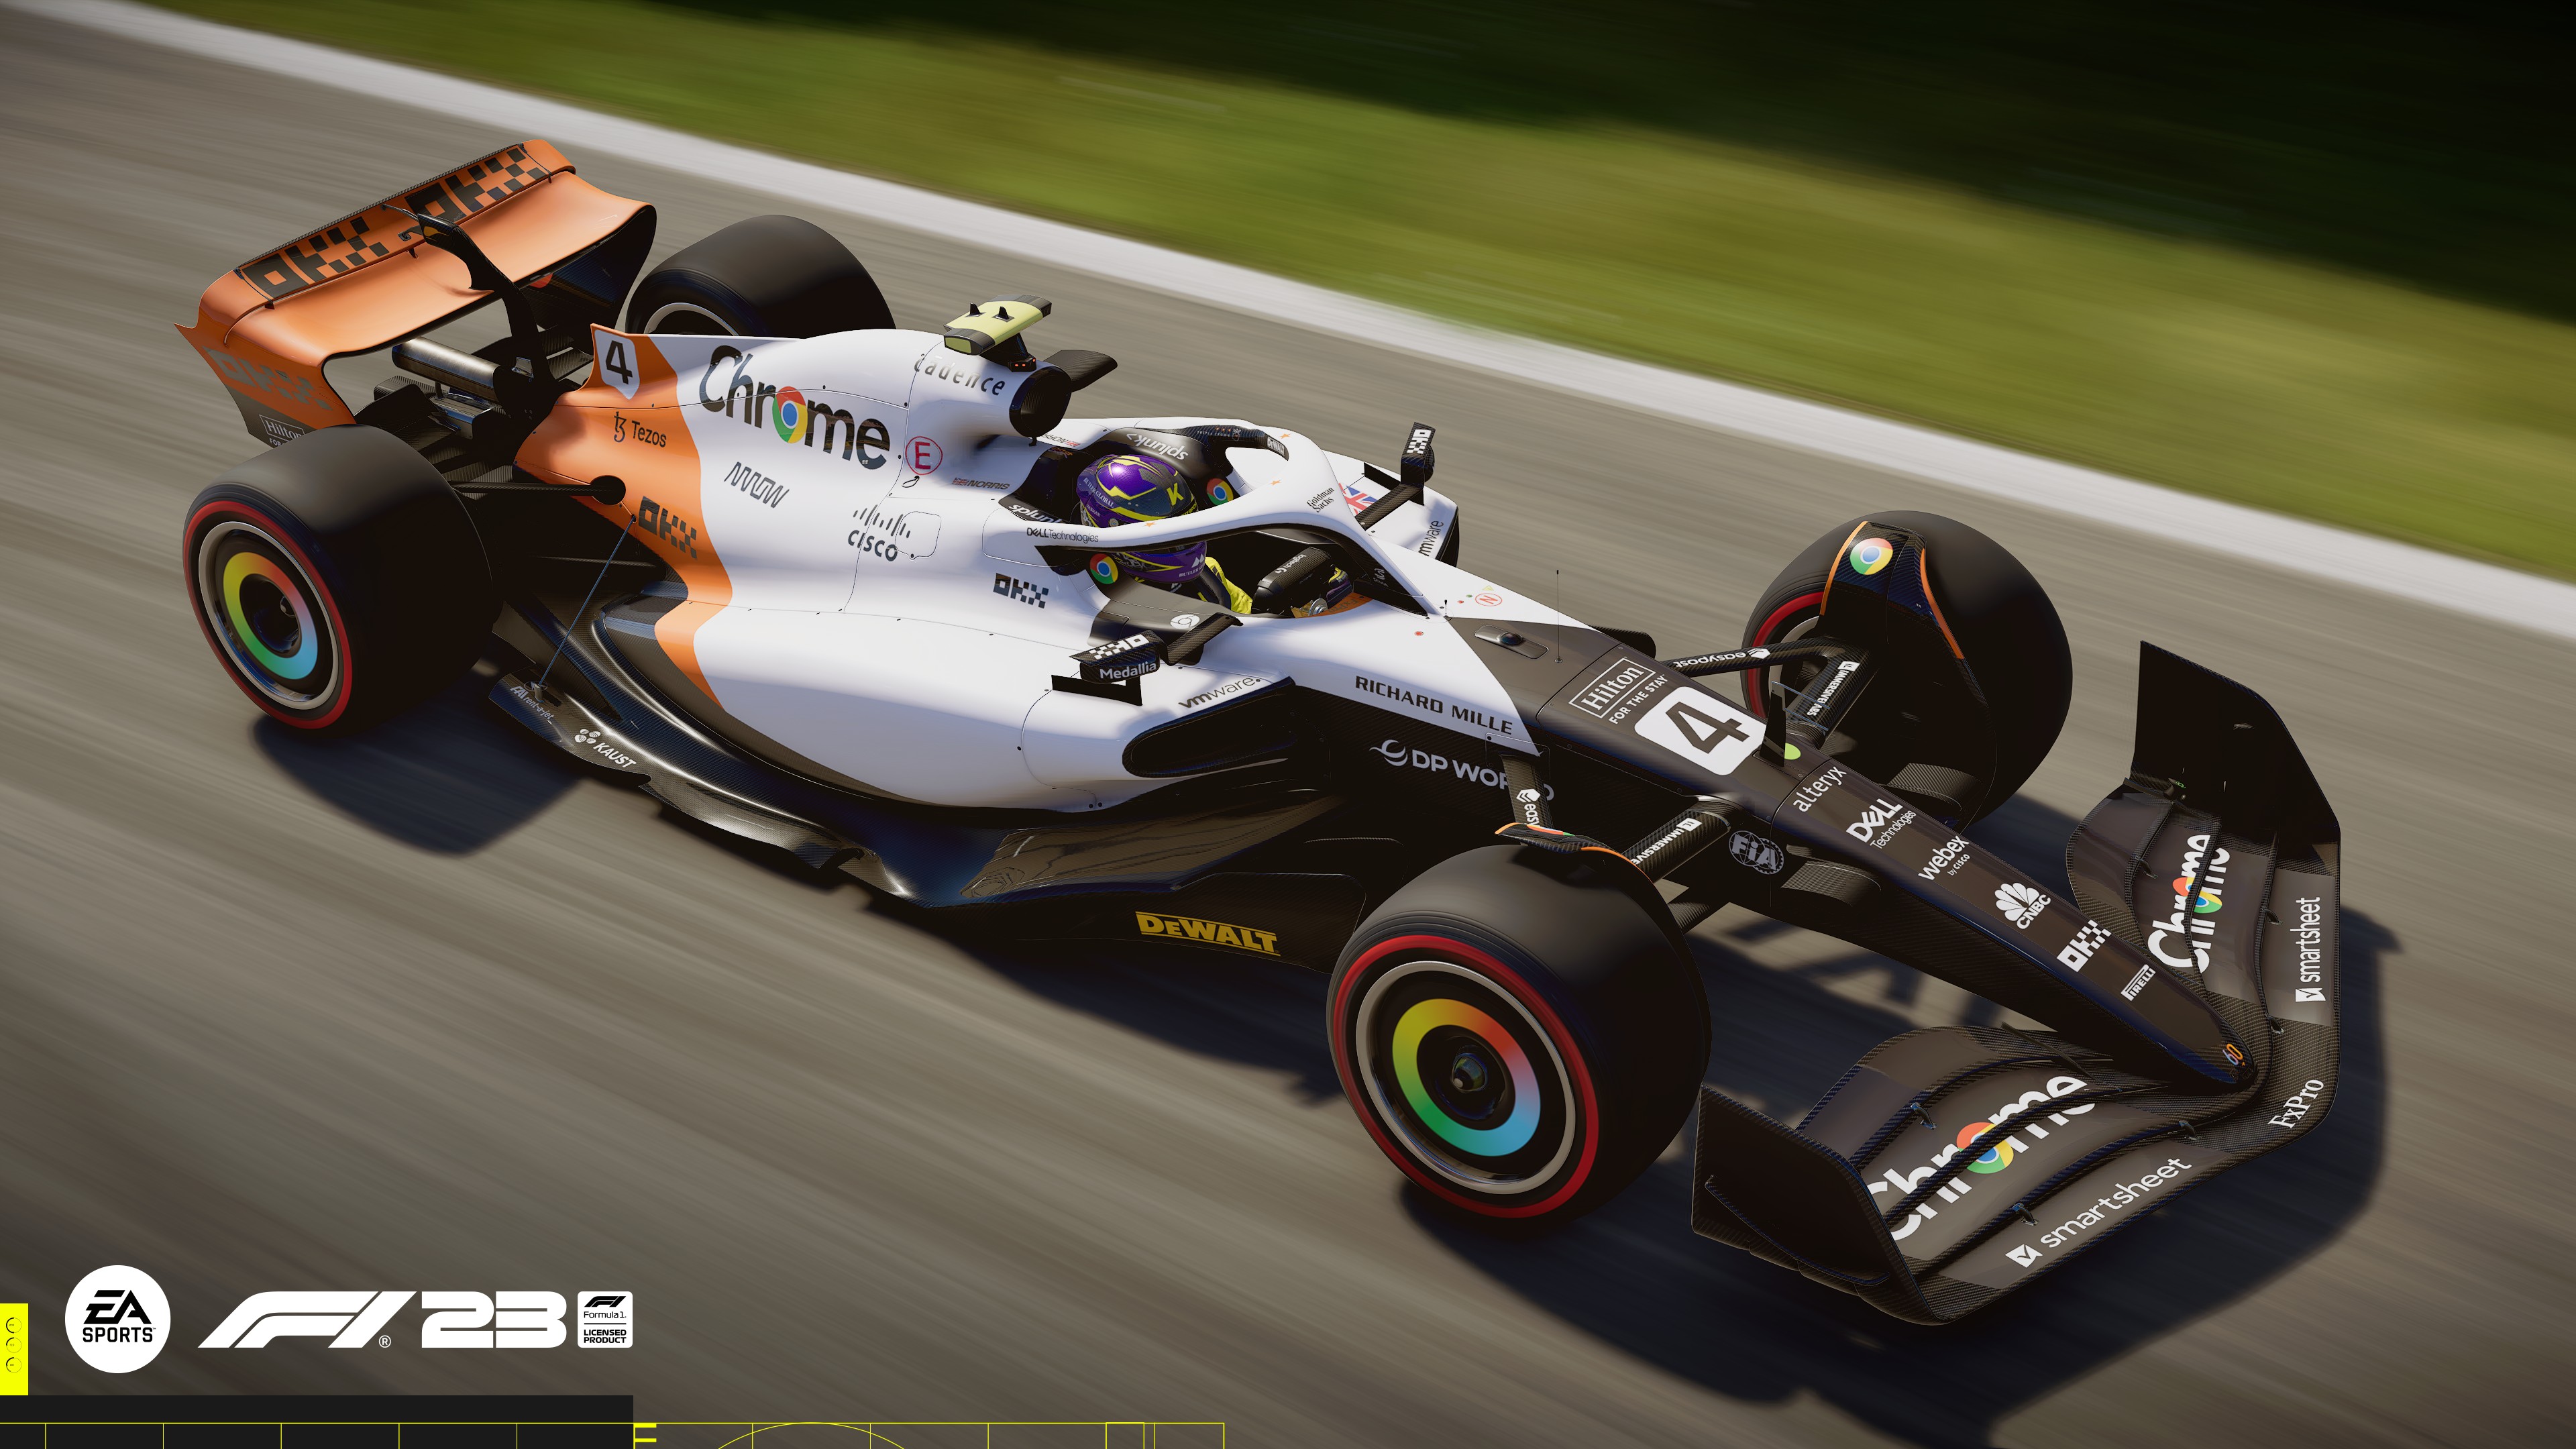 Aarav on X: When you install a livery mod wrong on the #F1 game   / X